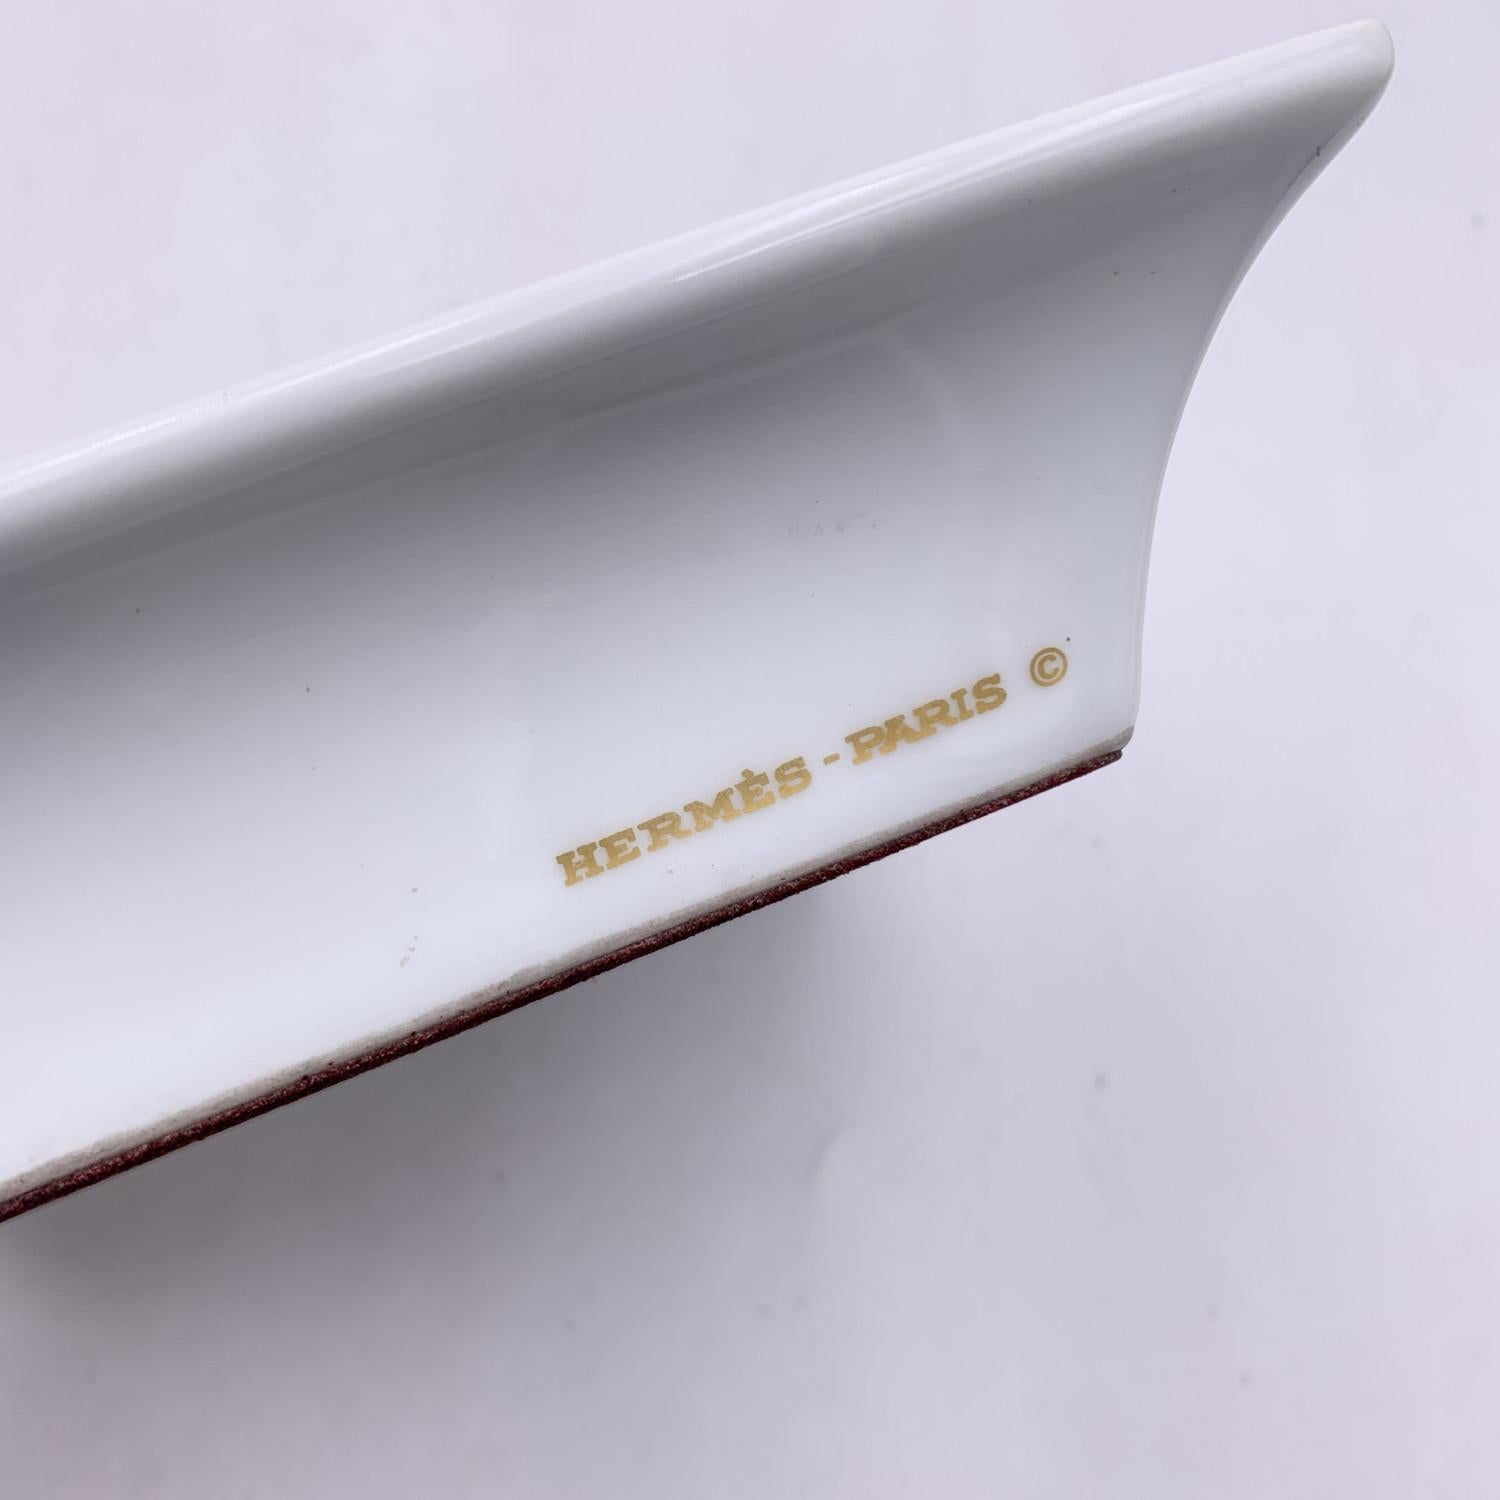 Hermes Vintage White Porcelain Cornucopia Rectangular Ashtray In Excellent Condition For Sale In Rome, Rome